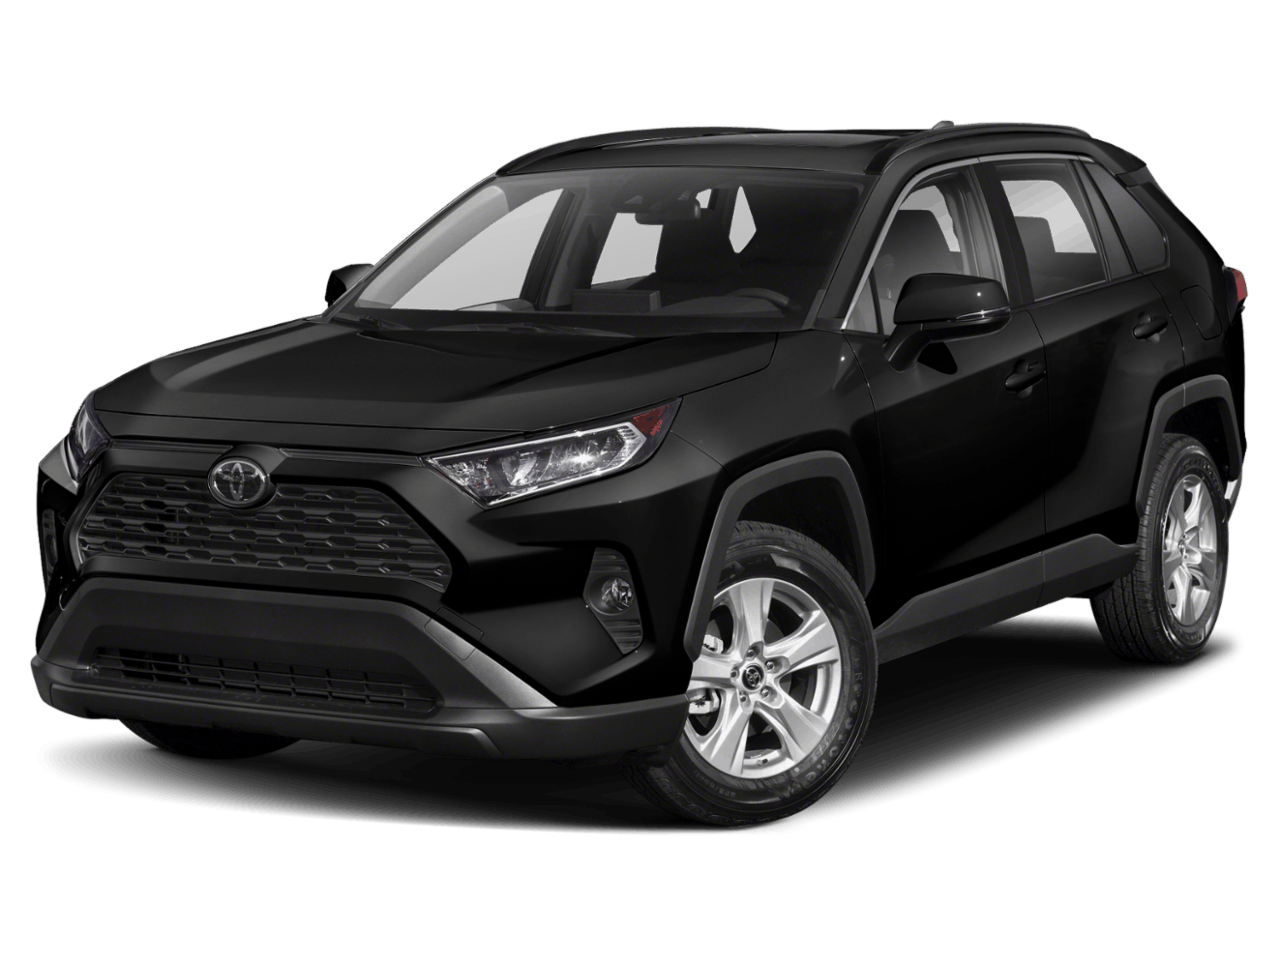 Used 2019 Toyota RAV4 XLE Premium with VIN 2T3A1RFV4KW071421 for sale in Waite Park, Minnesota